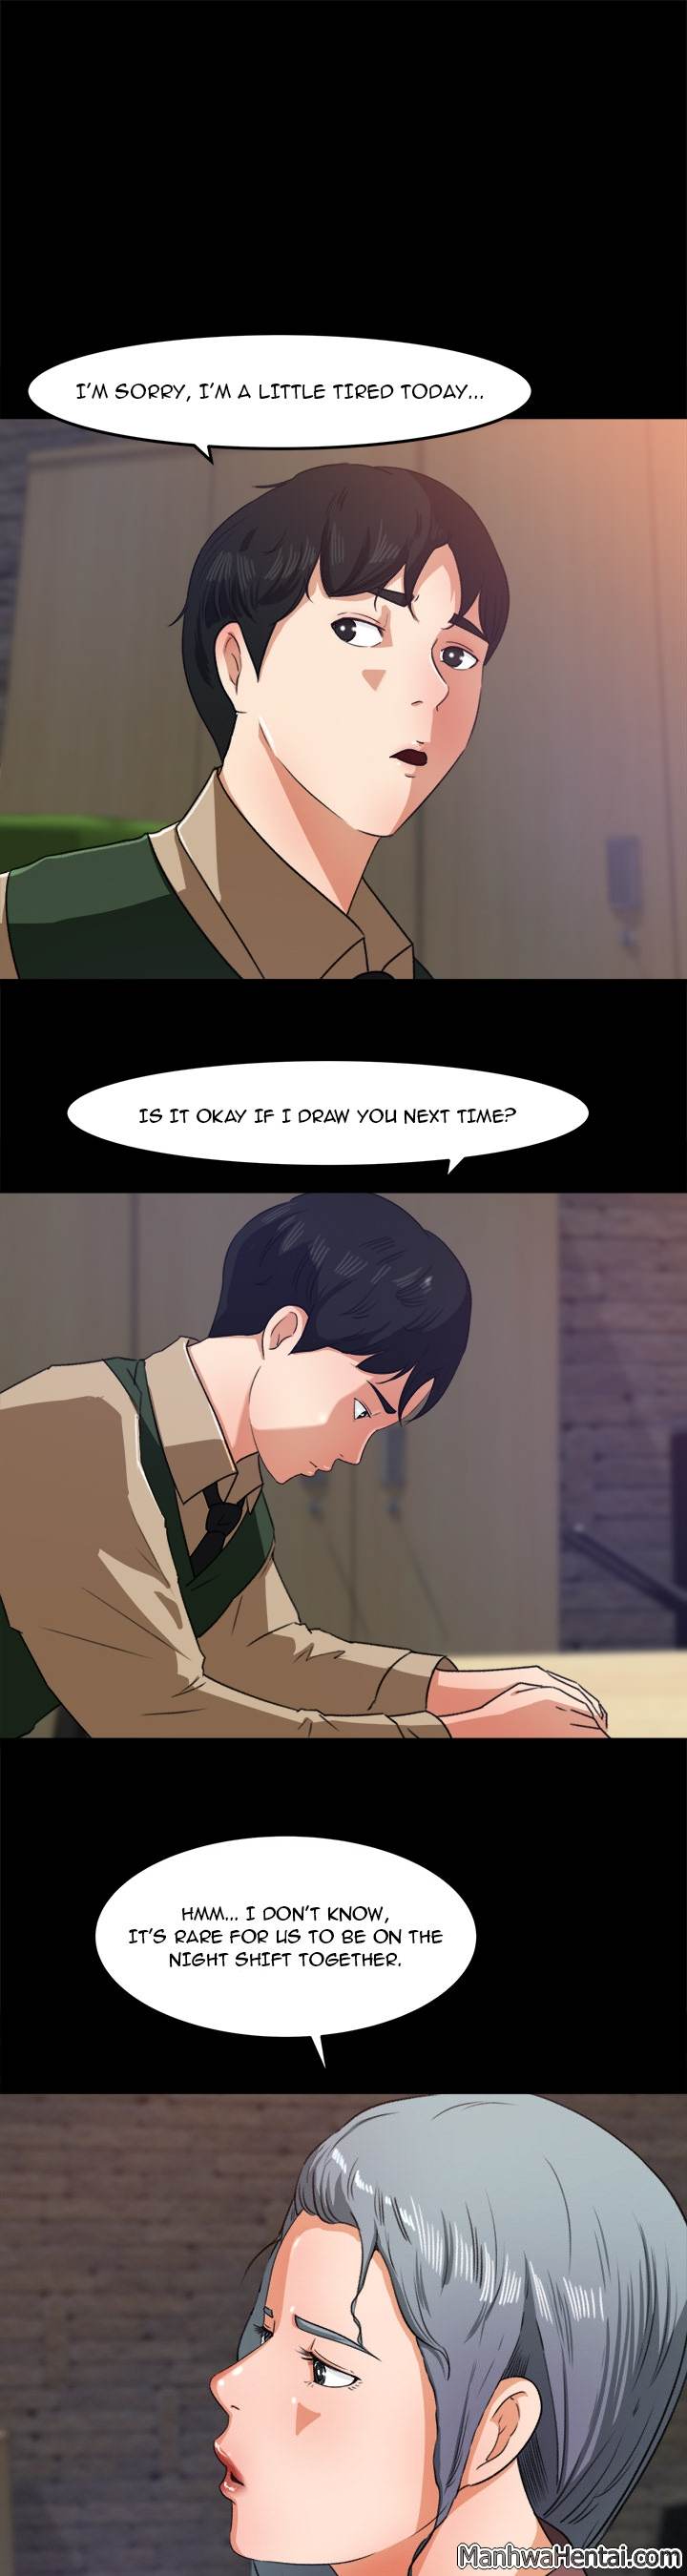 Inside the Uniform - Chapter 17 Page 1